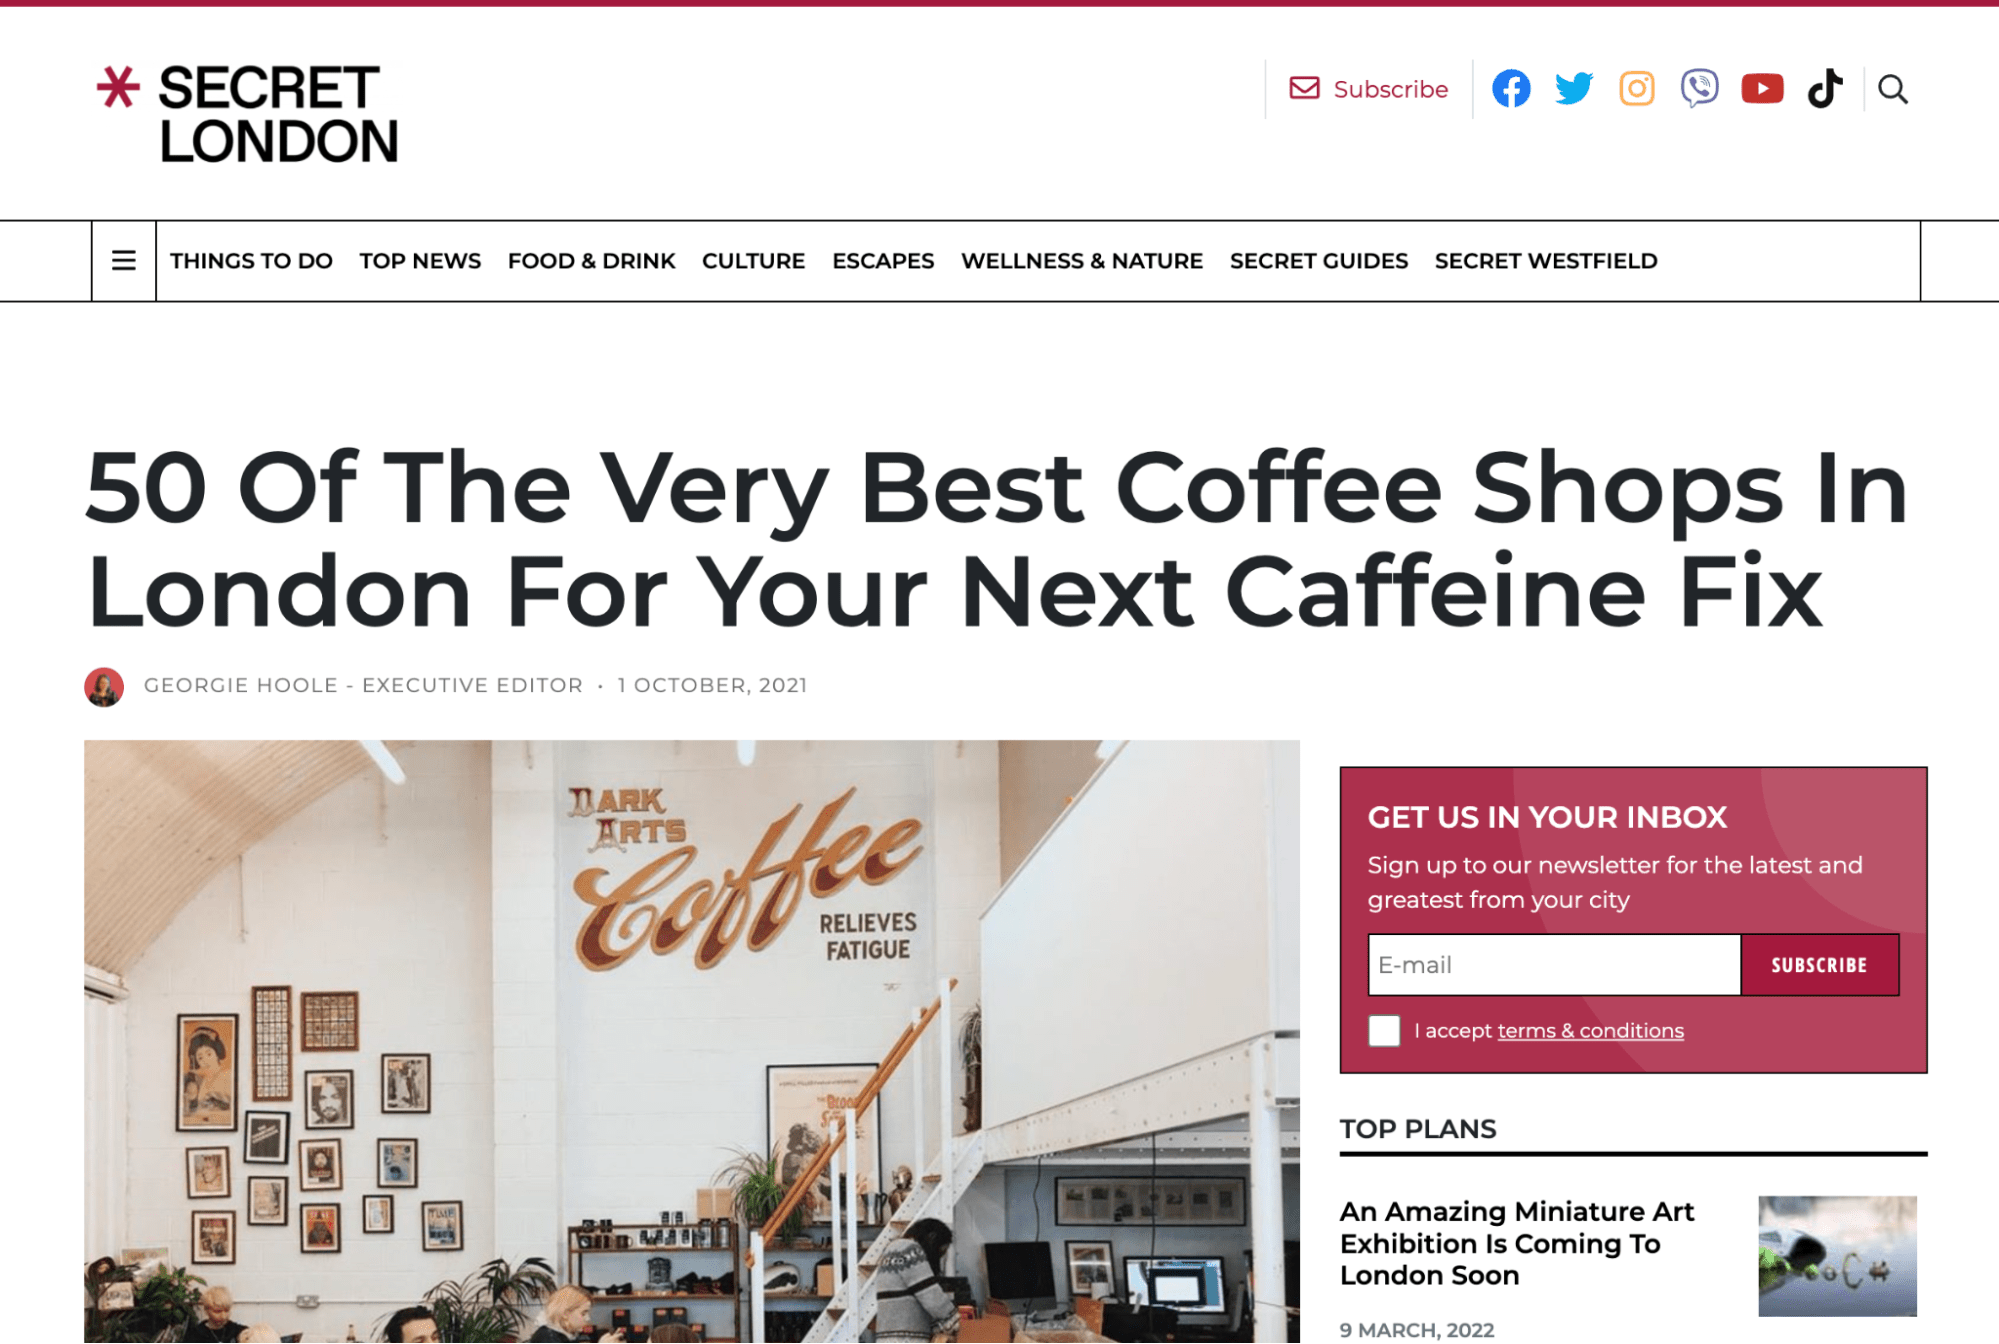 Example listicle of the best coffee shops